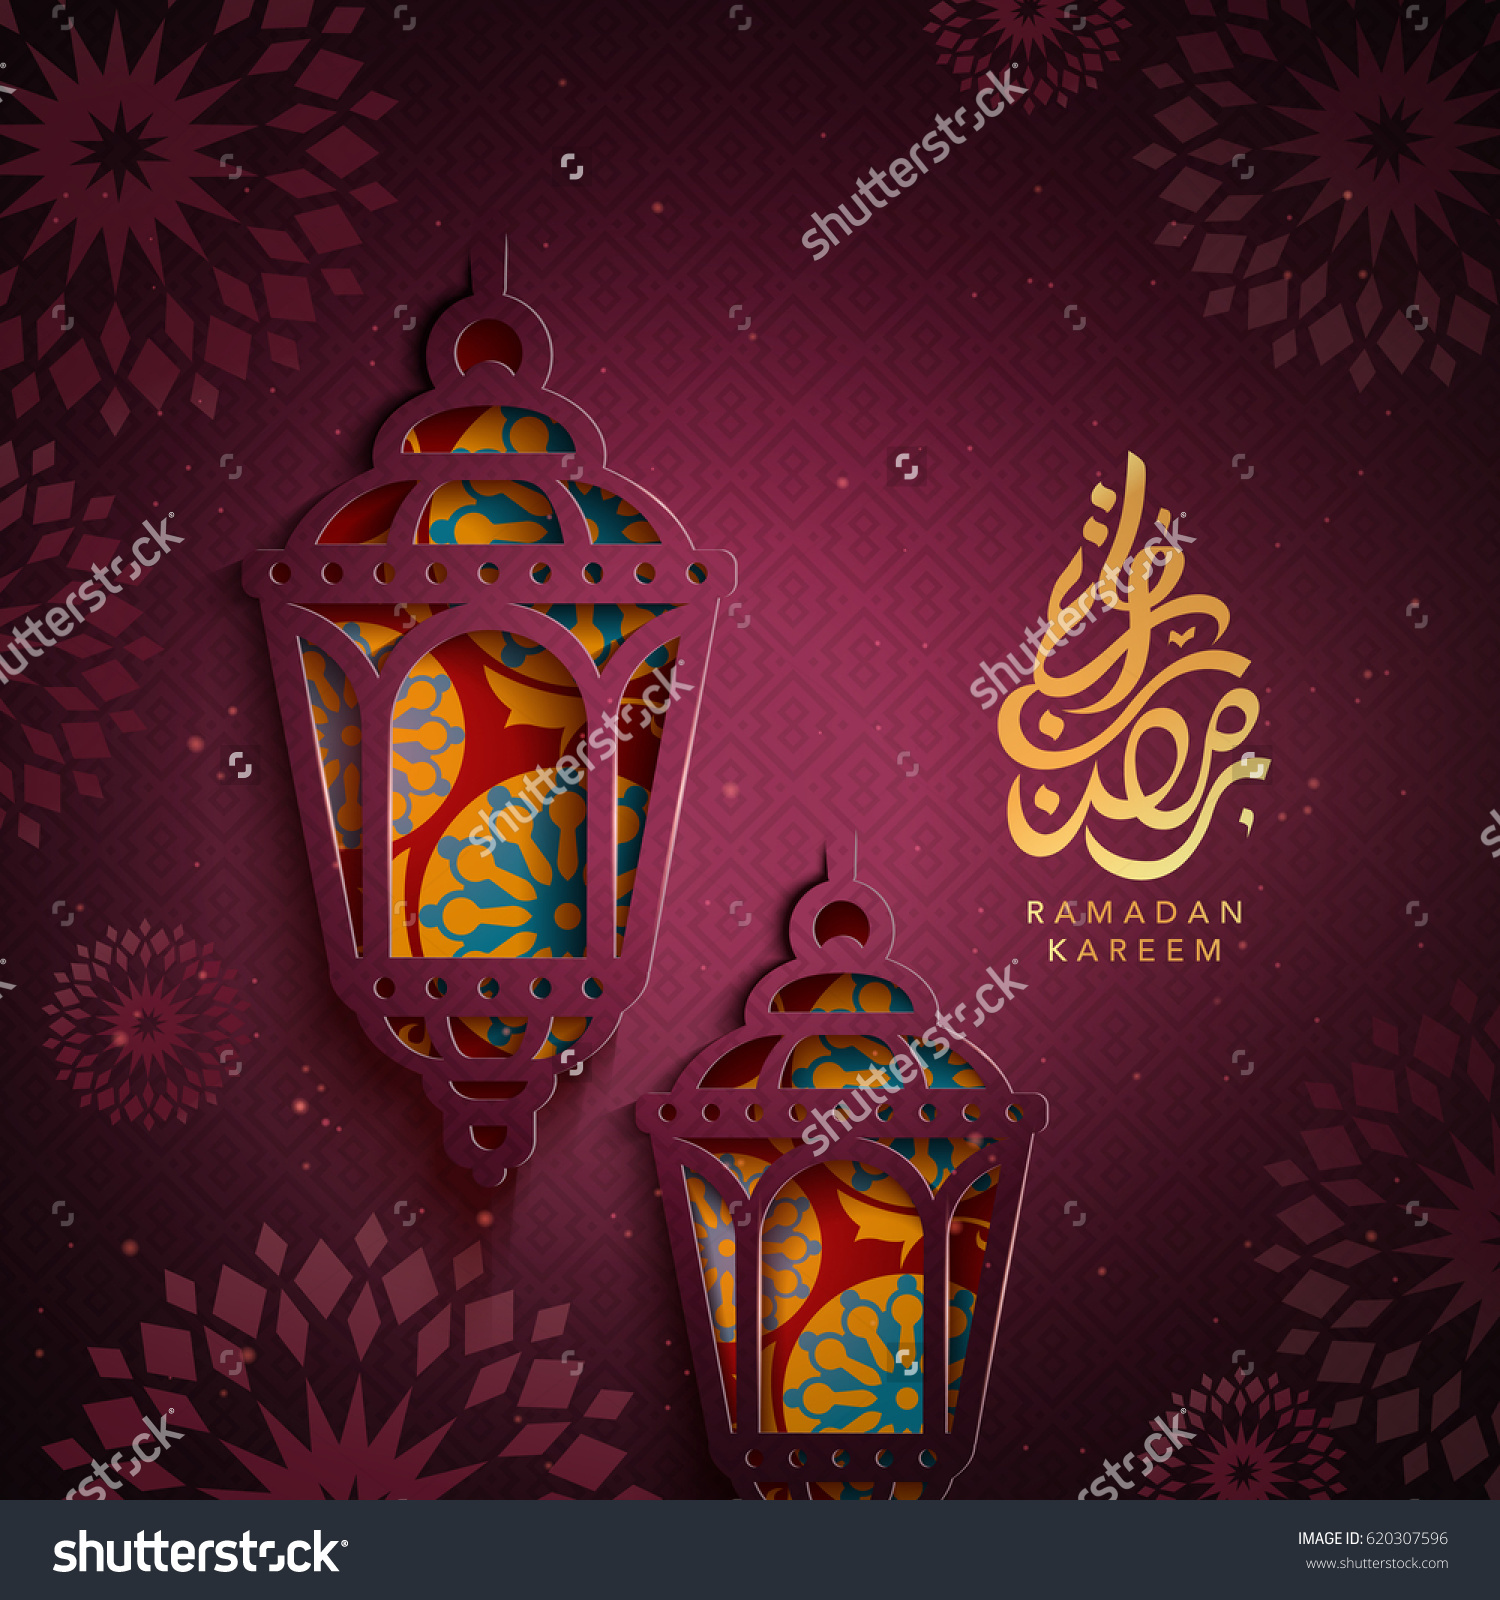 a83n_stock-photo-arabic-calligraphy-design-for-ramadan-with-lanterns-and-paper-cutting-arts-620307596.jpg